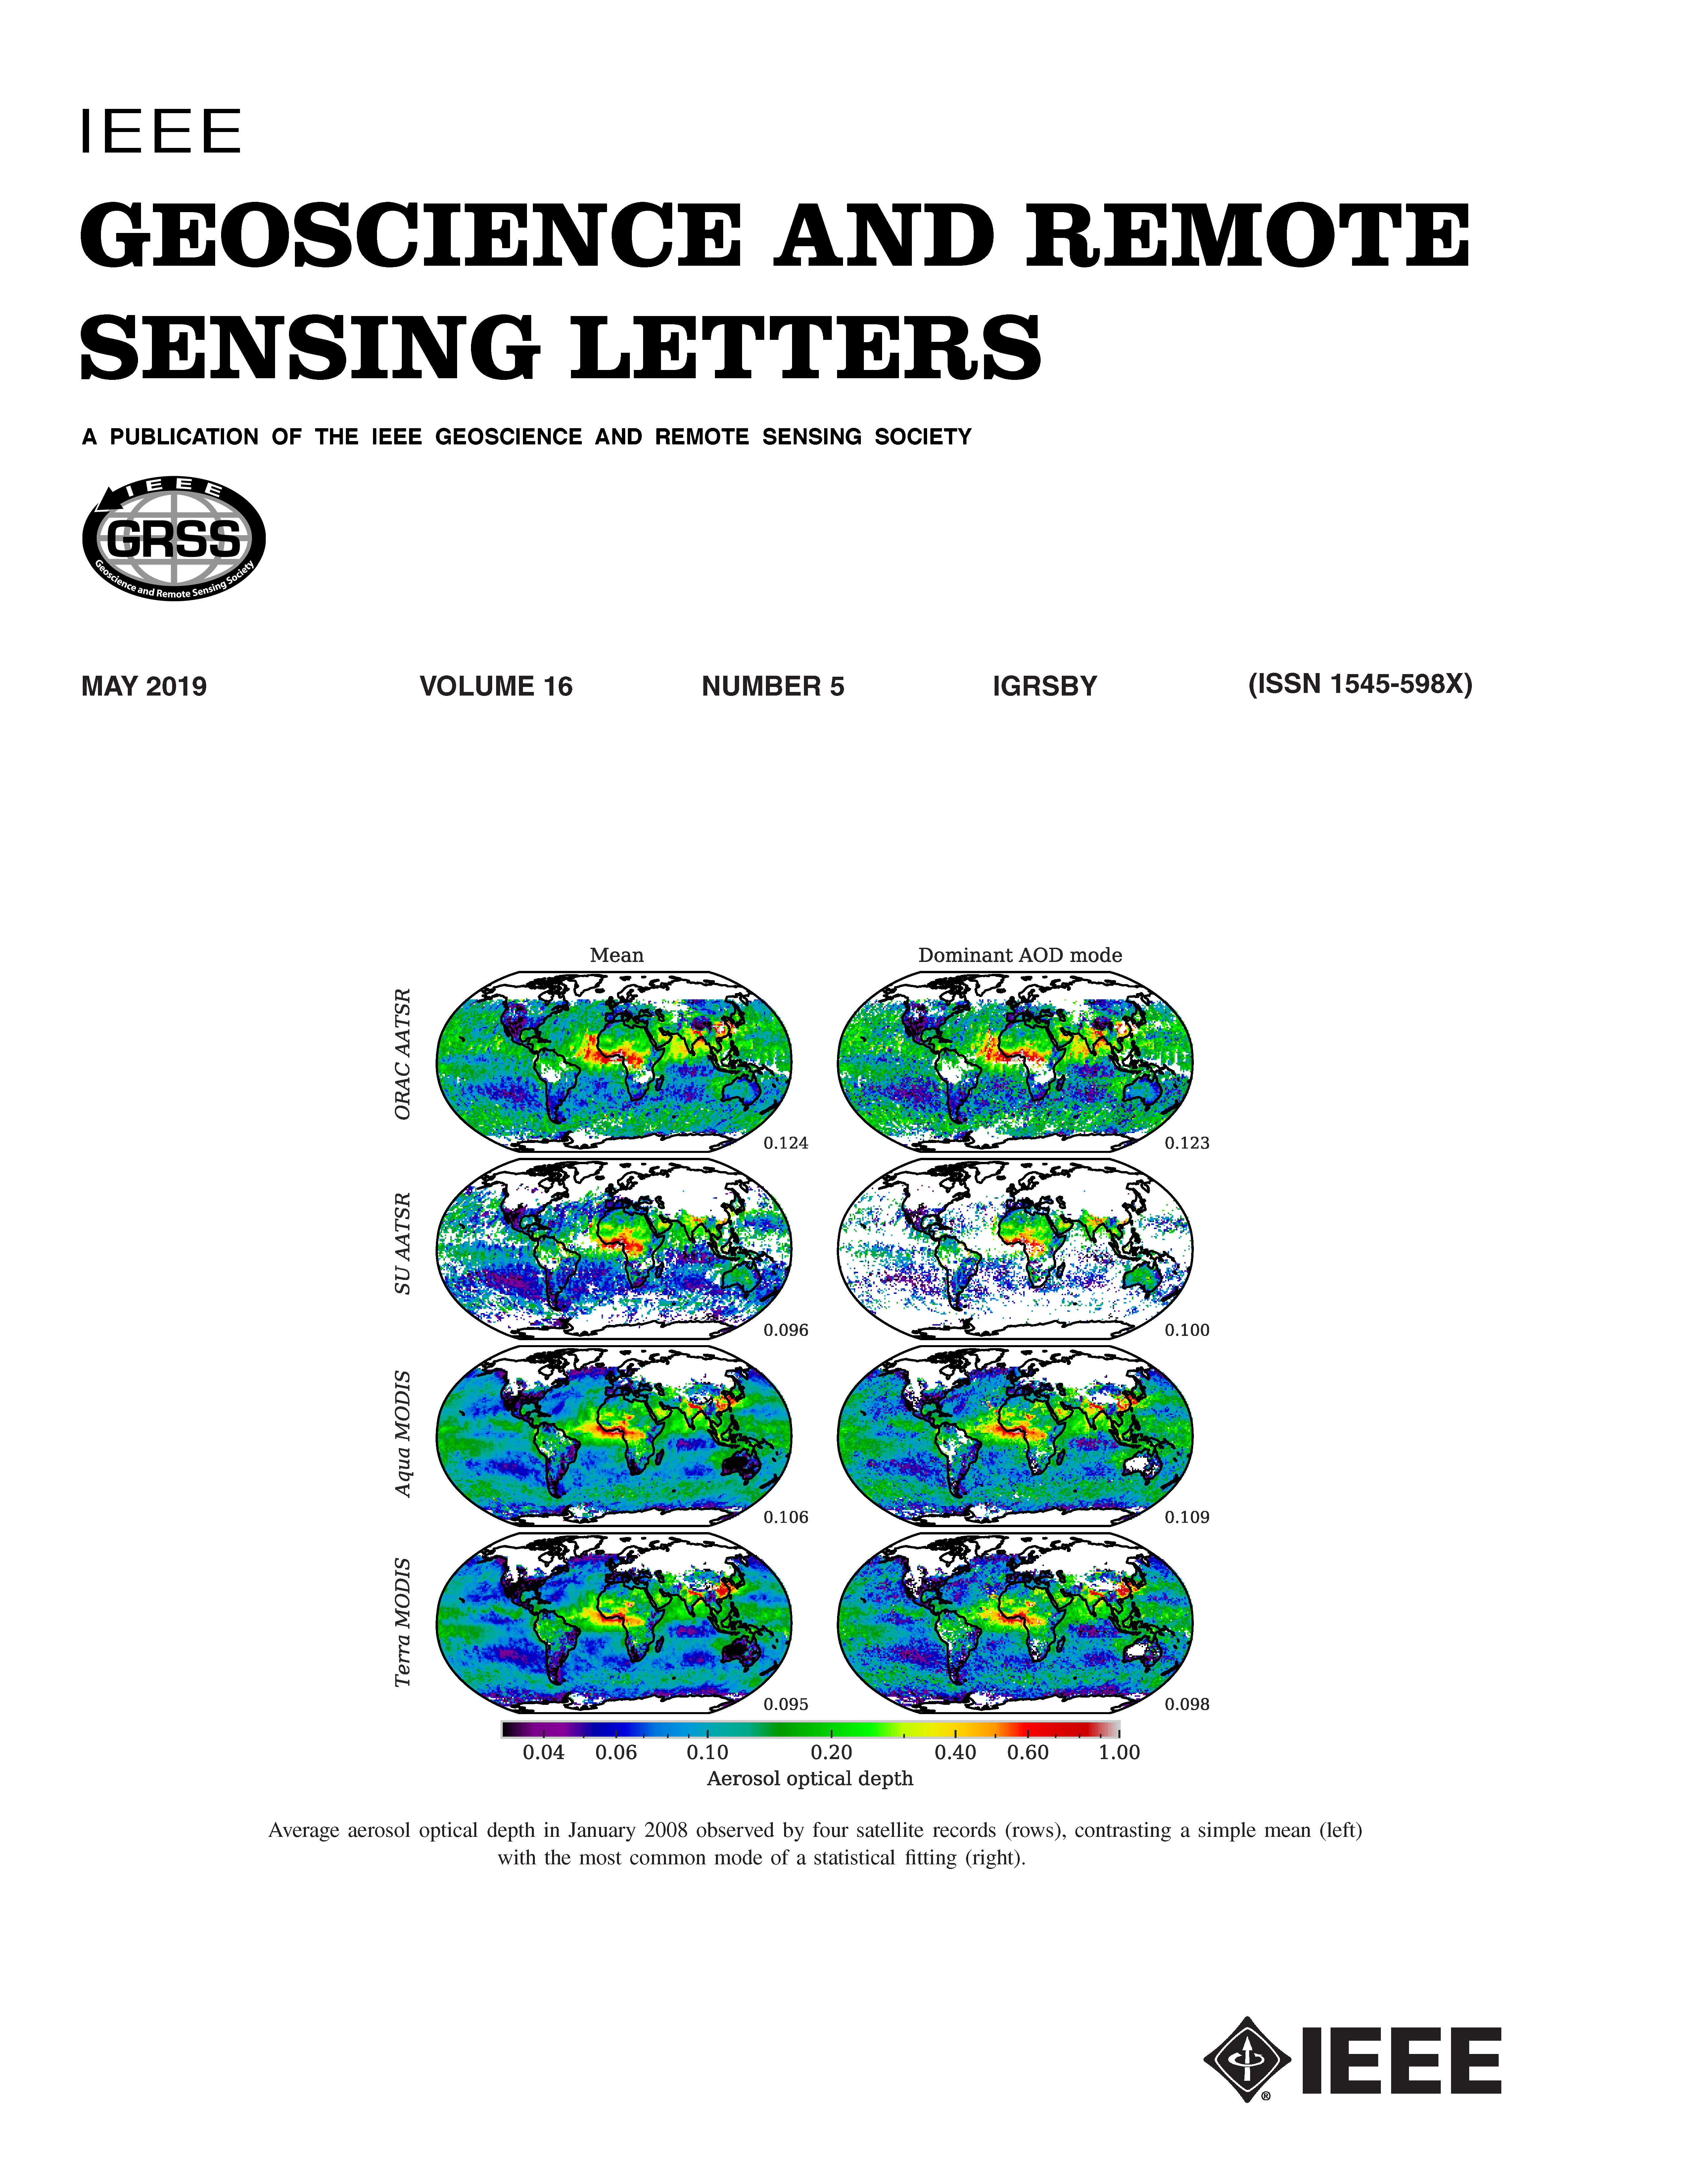 Cover image of IEEE Geoscience and Remote Sensing Letters, Volume 16, Issue 5, May 2019.